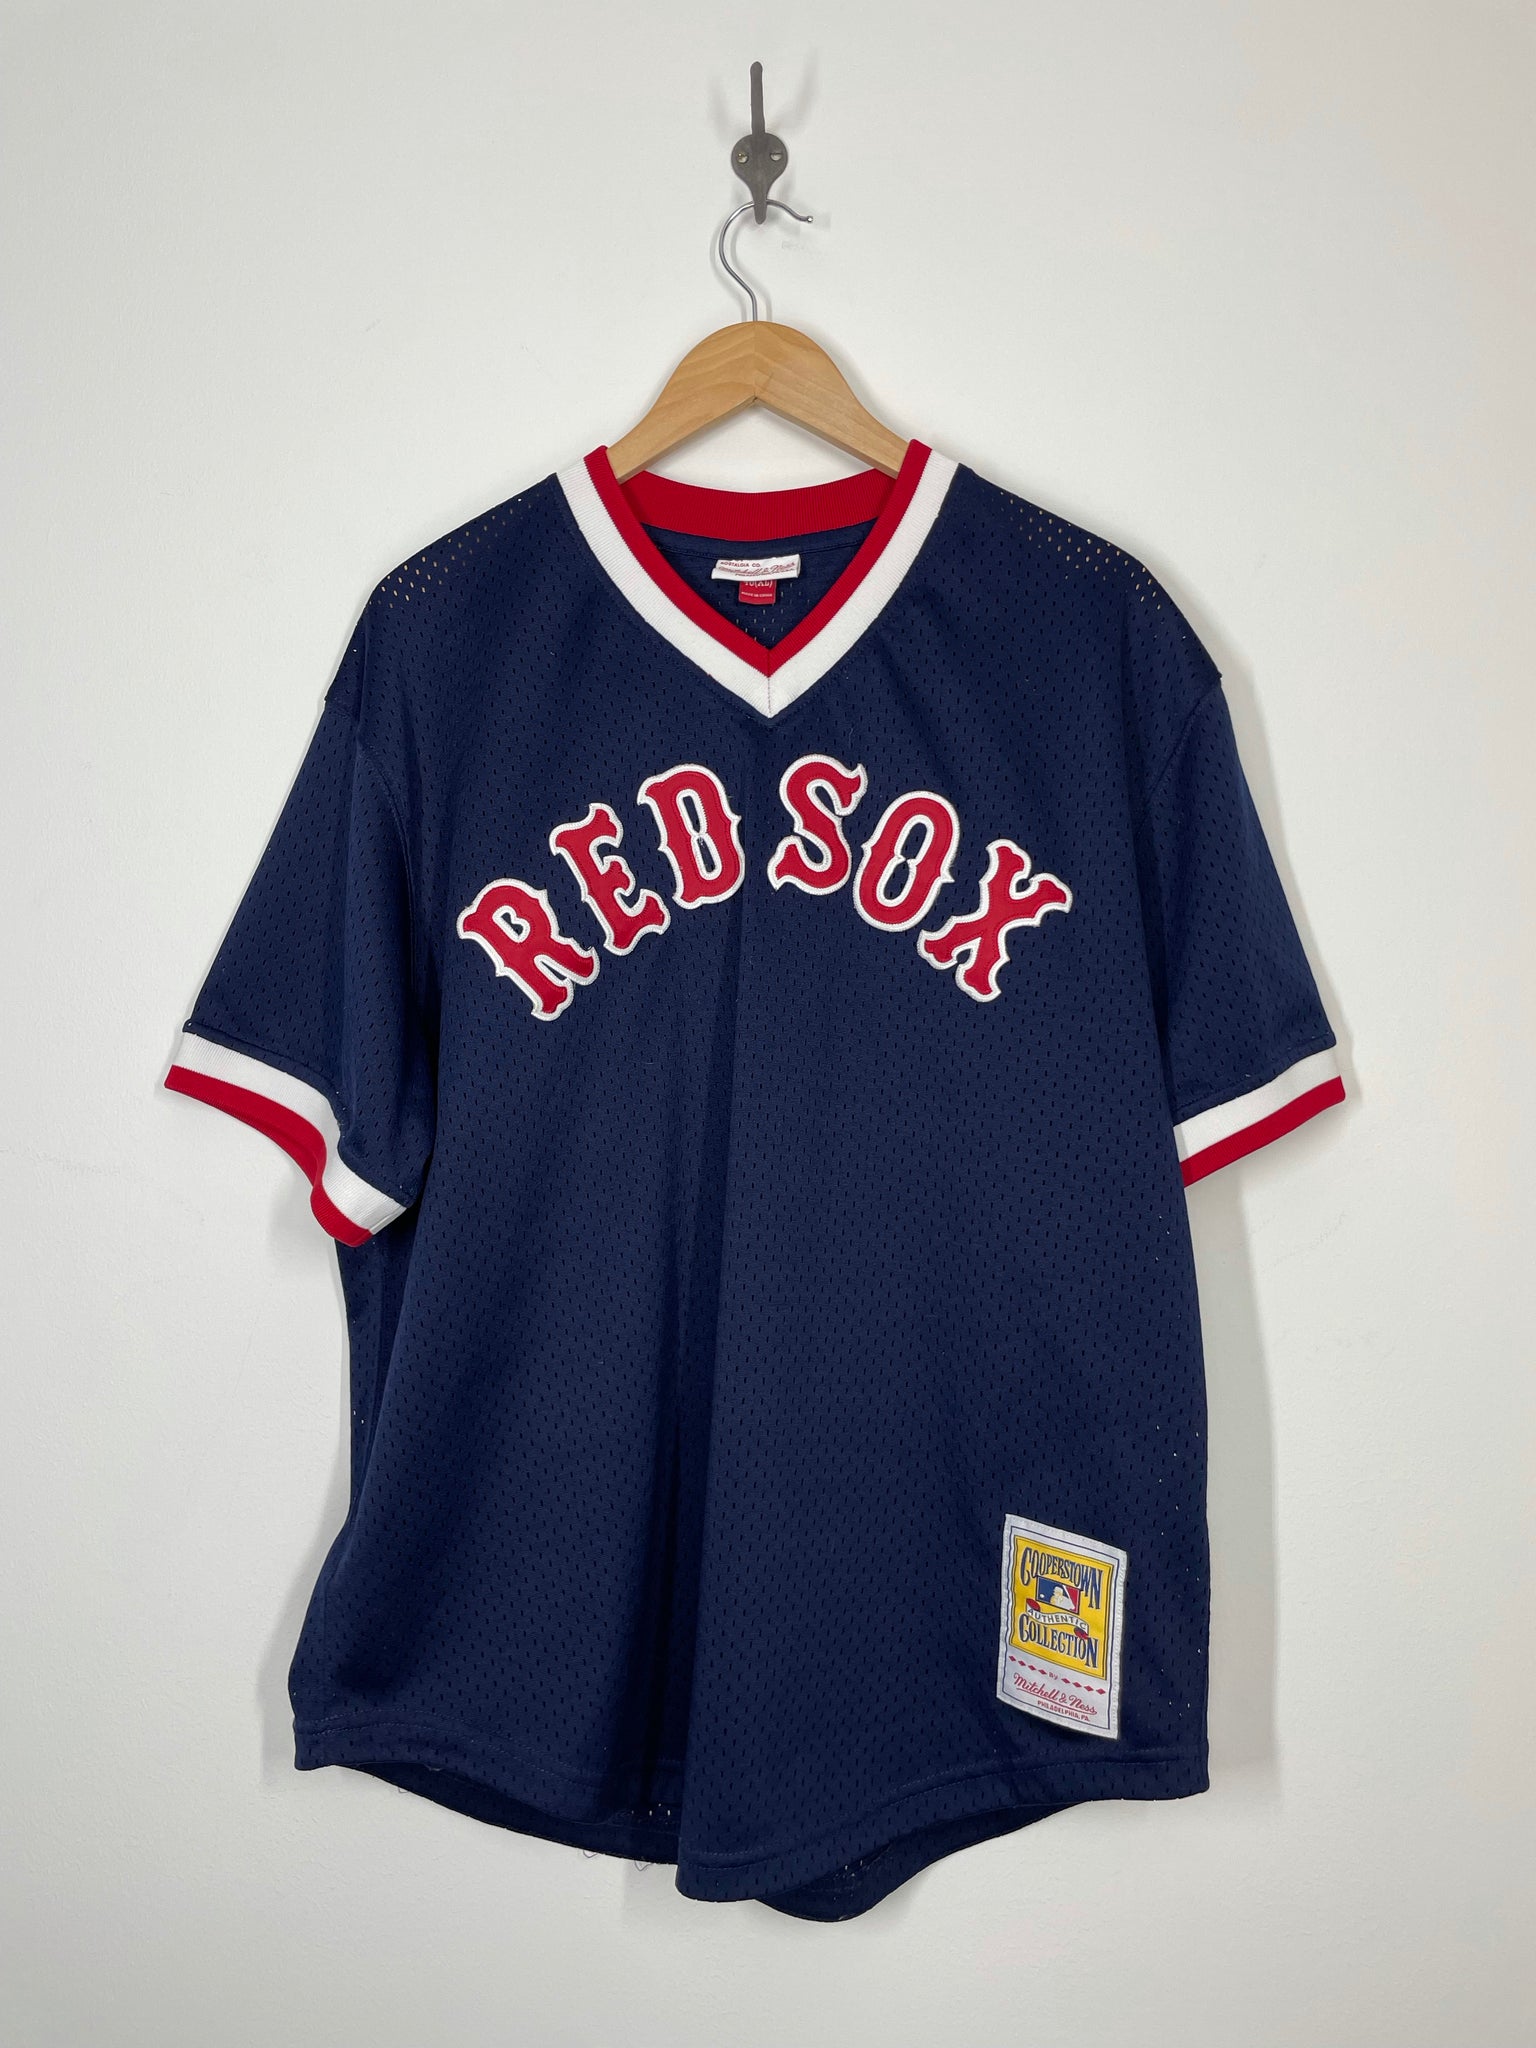 Ted Williams Boston Red Sox MLB Jerseys for sale